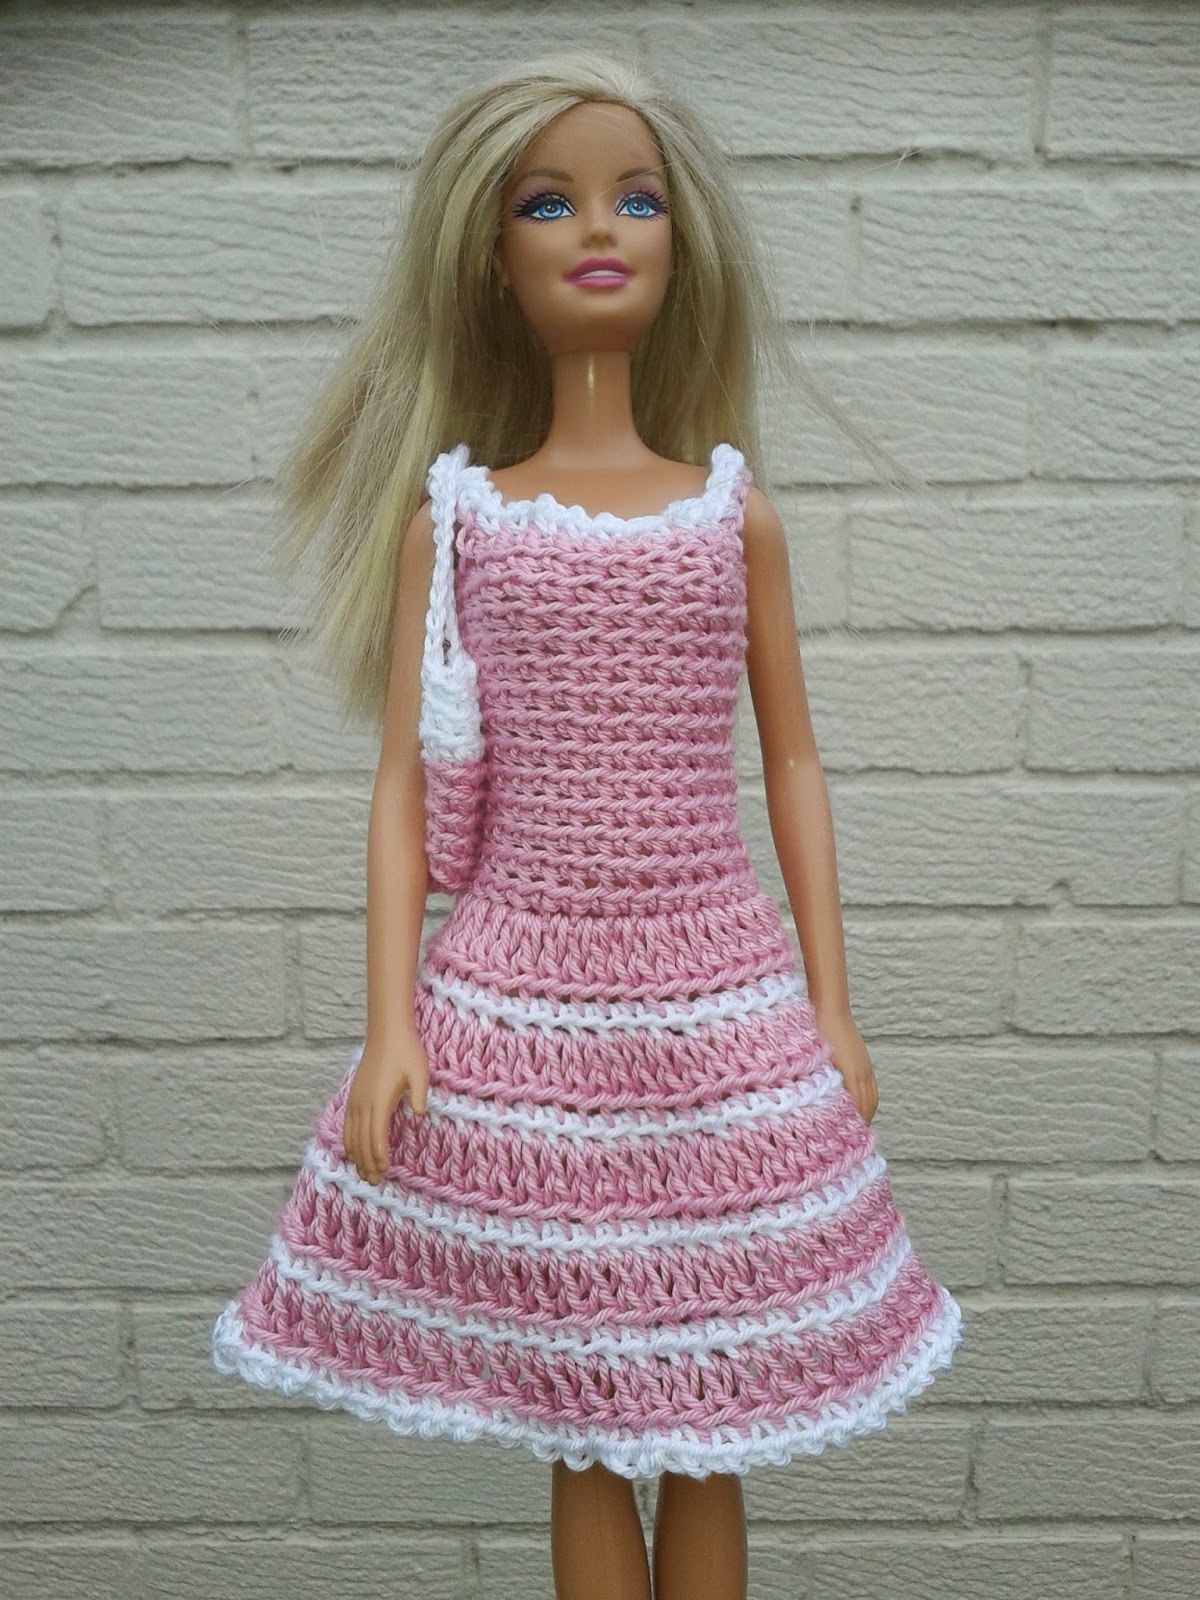 Pretty Crocheted Dresses and Skirts for Summer